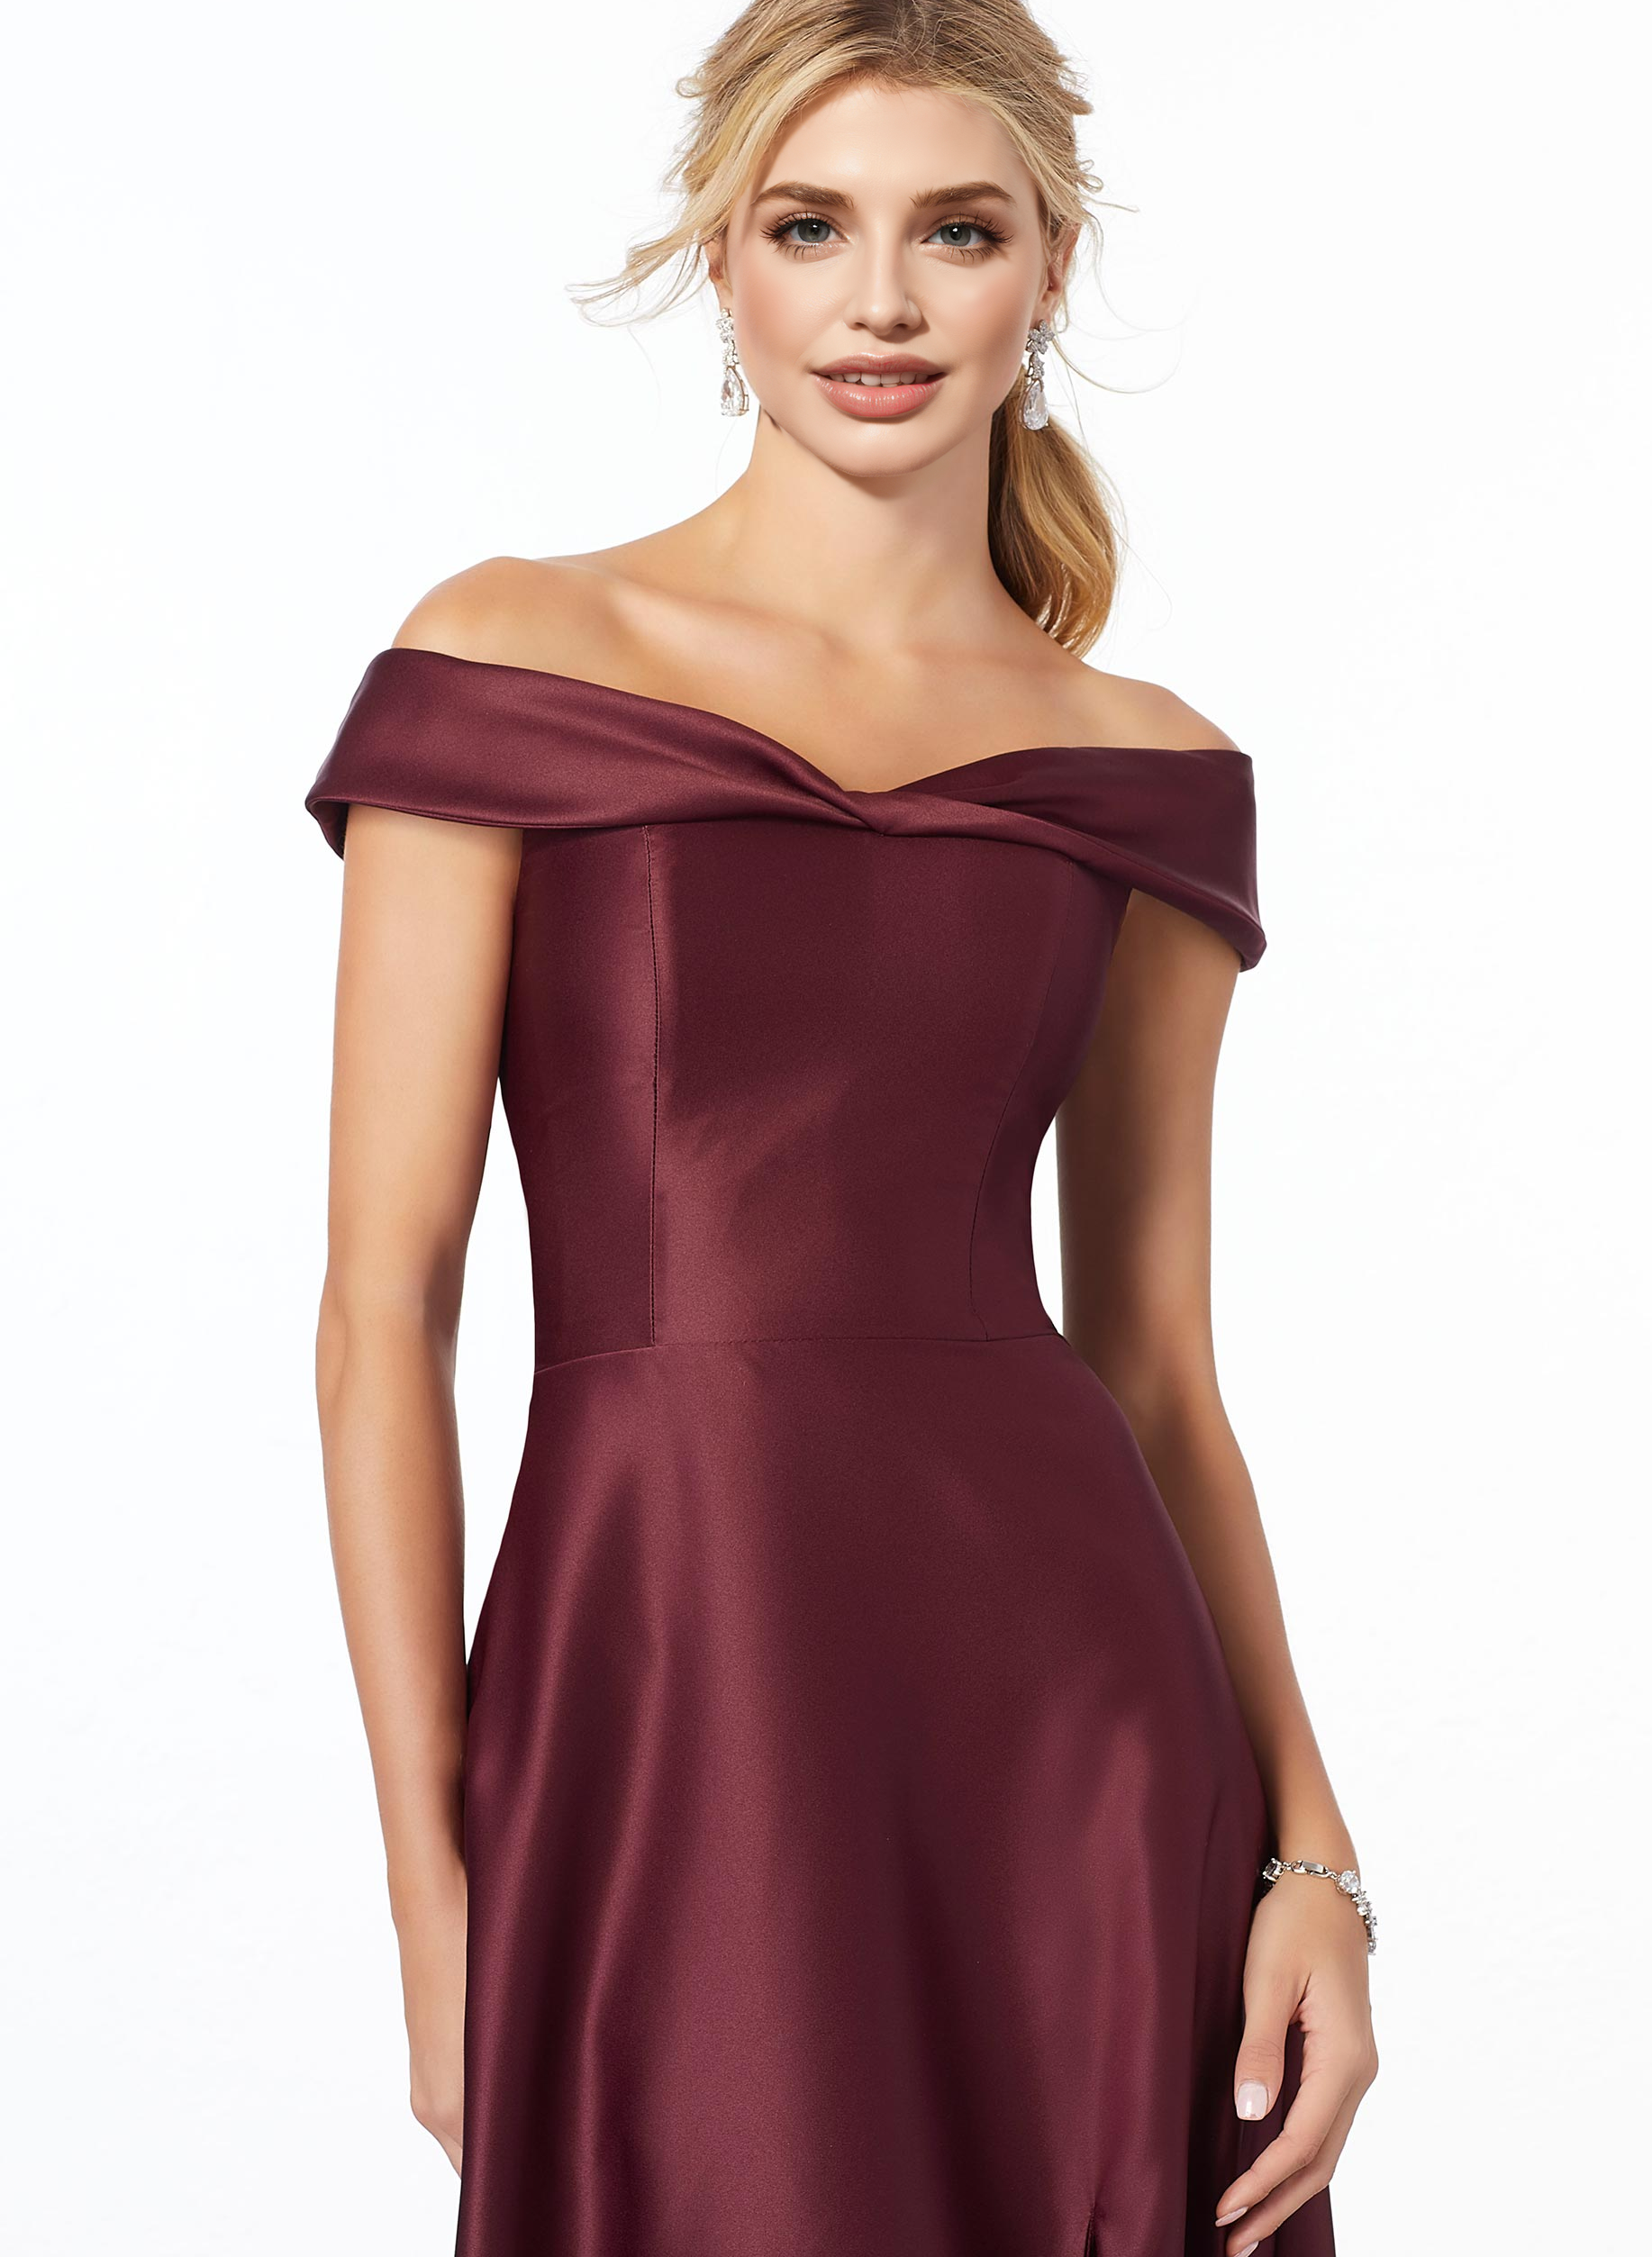 Red Satin Off-The-Shoulder A-Line Bridesmaid Dresses With Pockets